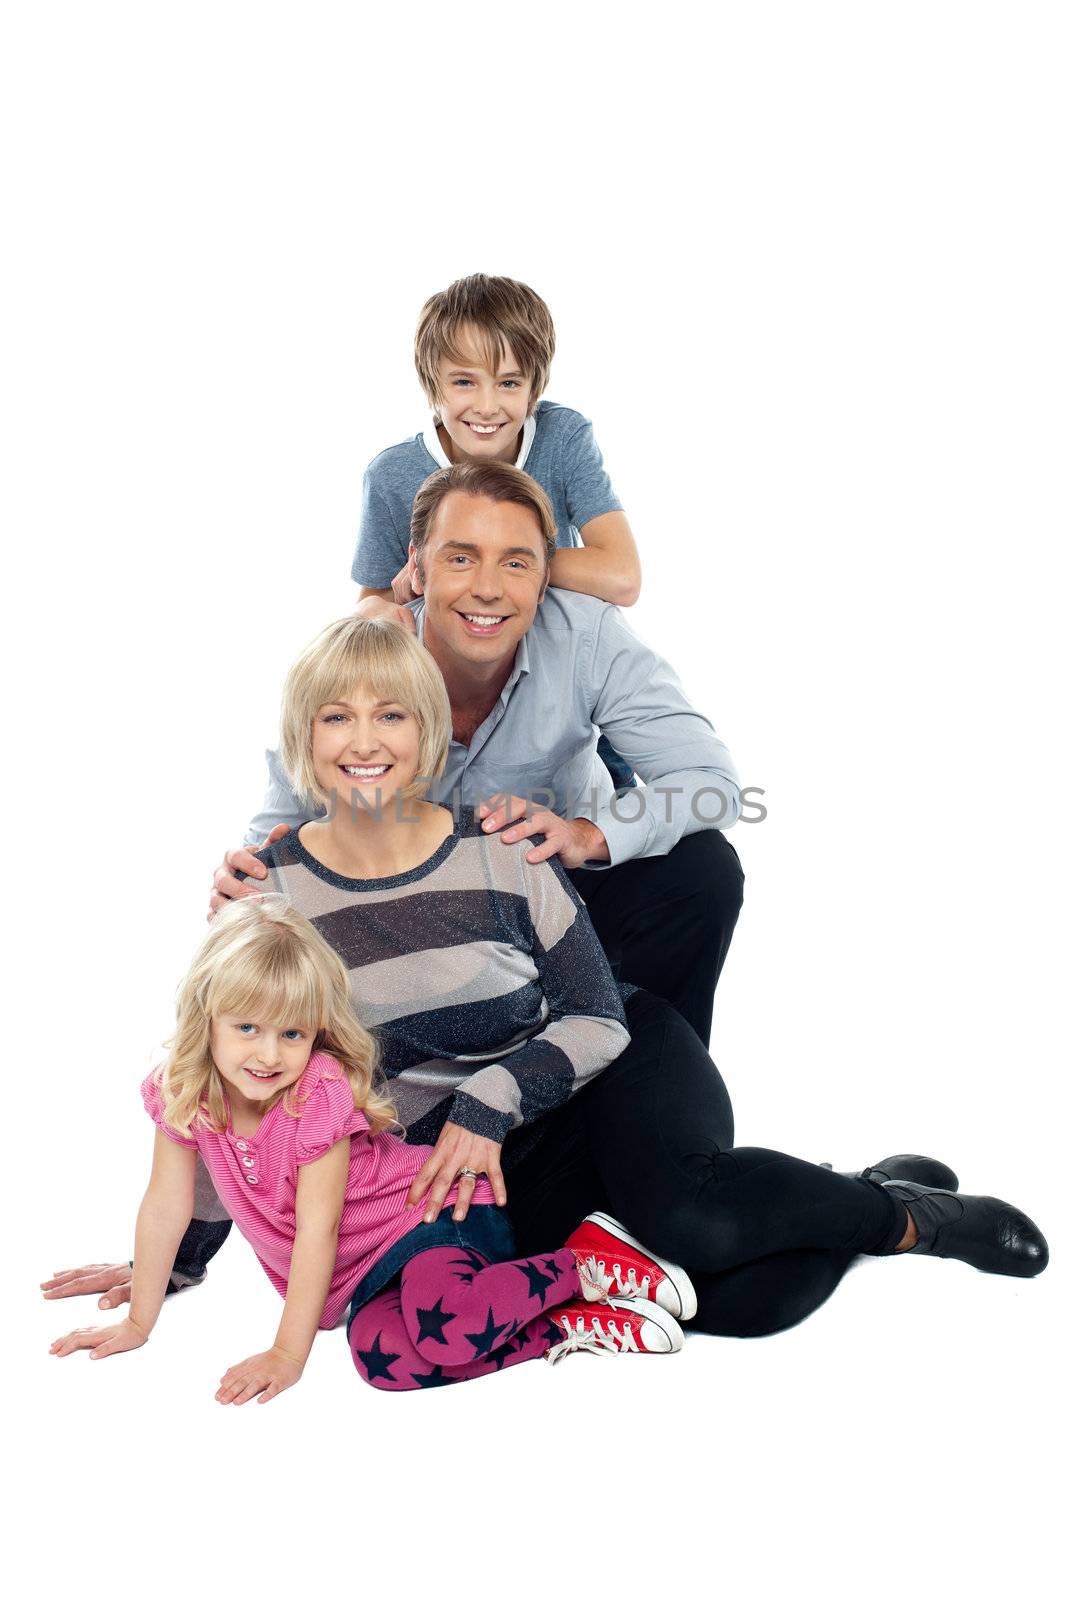 Closely bonded family in a studio. Isolated against white background.